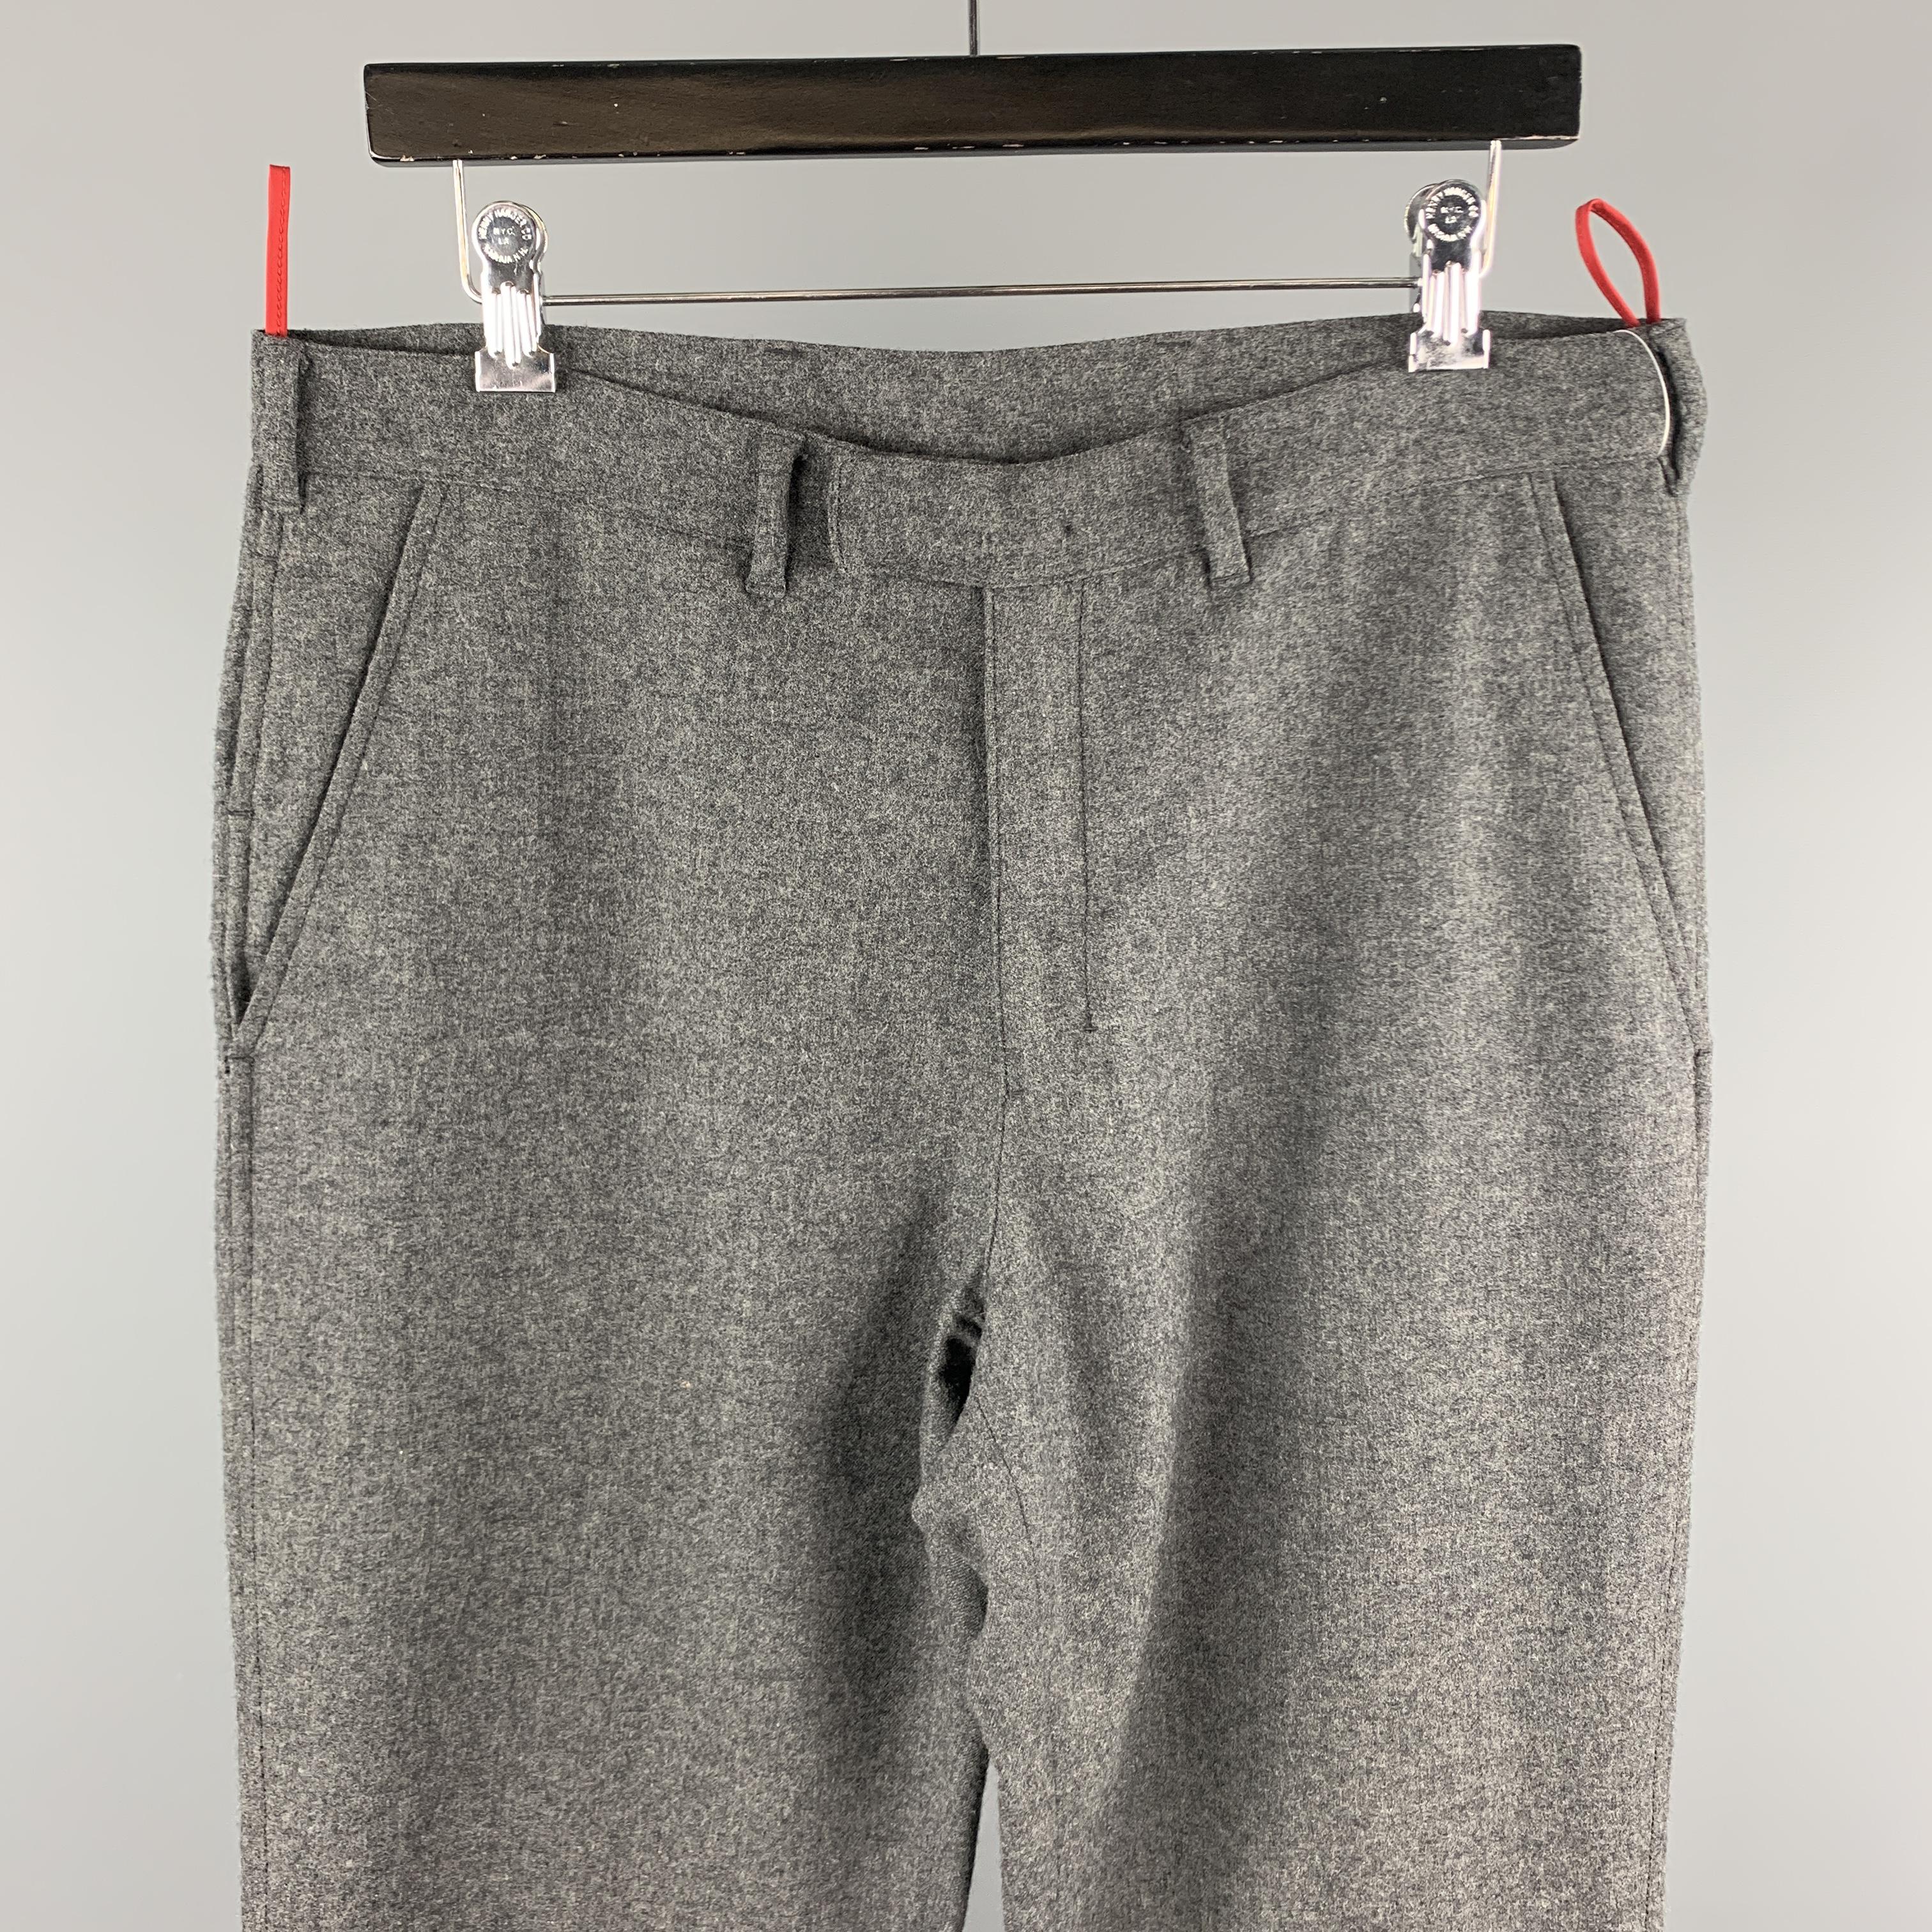 PRADA casual pants comes in a gray wool blend featuring a regular fit, front tab, and a zip fly closure. Made in Italy.  

Excellent Pre-Owned Condition.
Marked: IT 50

Measurements:

Waist: 34 in. 
Rise: 10 in. 
Inseam: 34 in. 